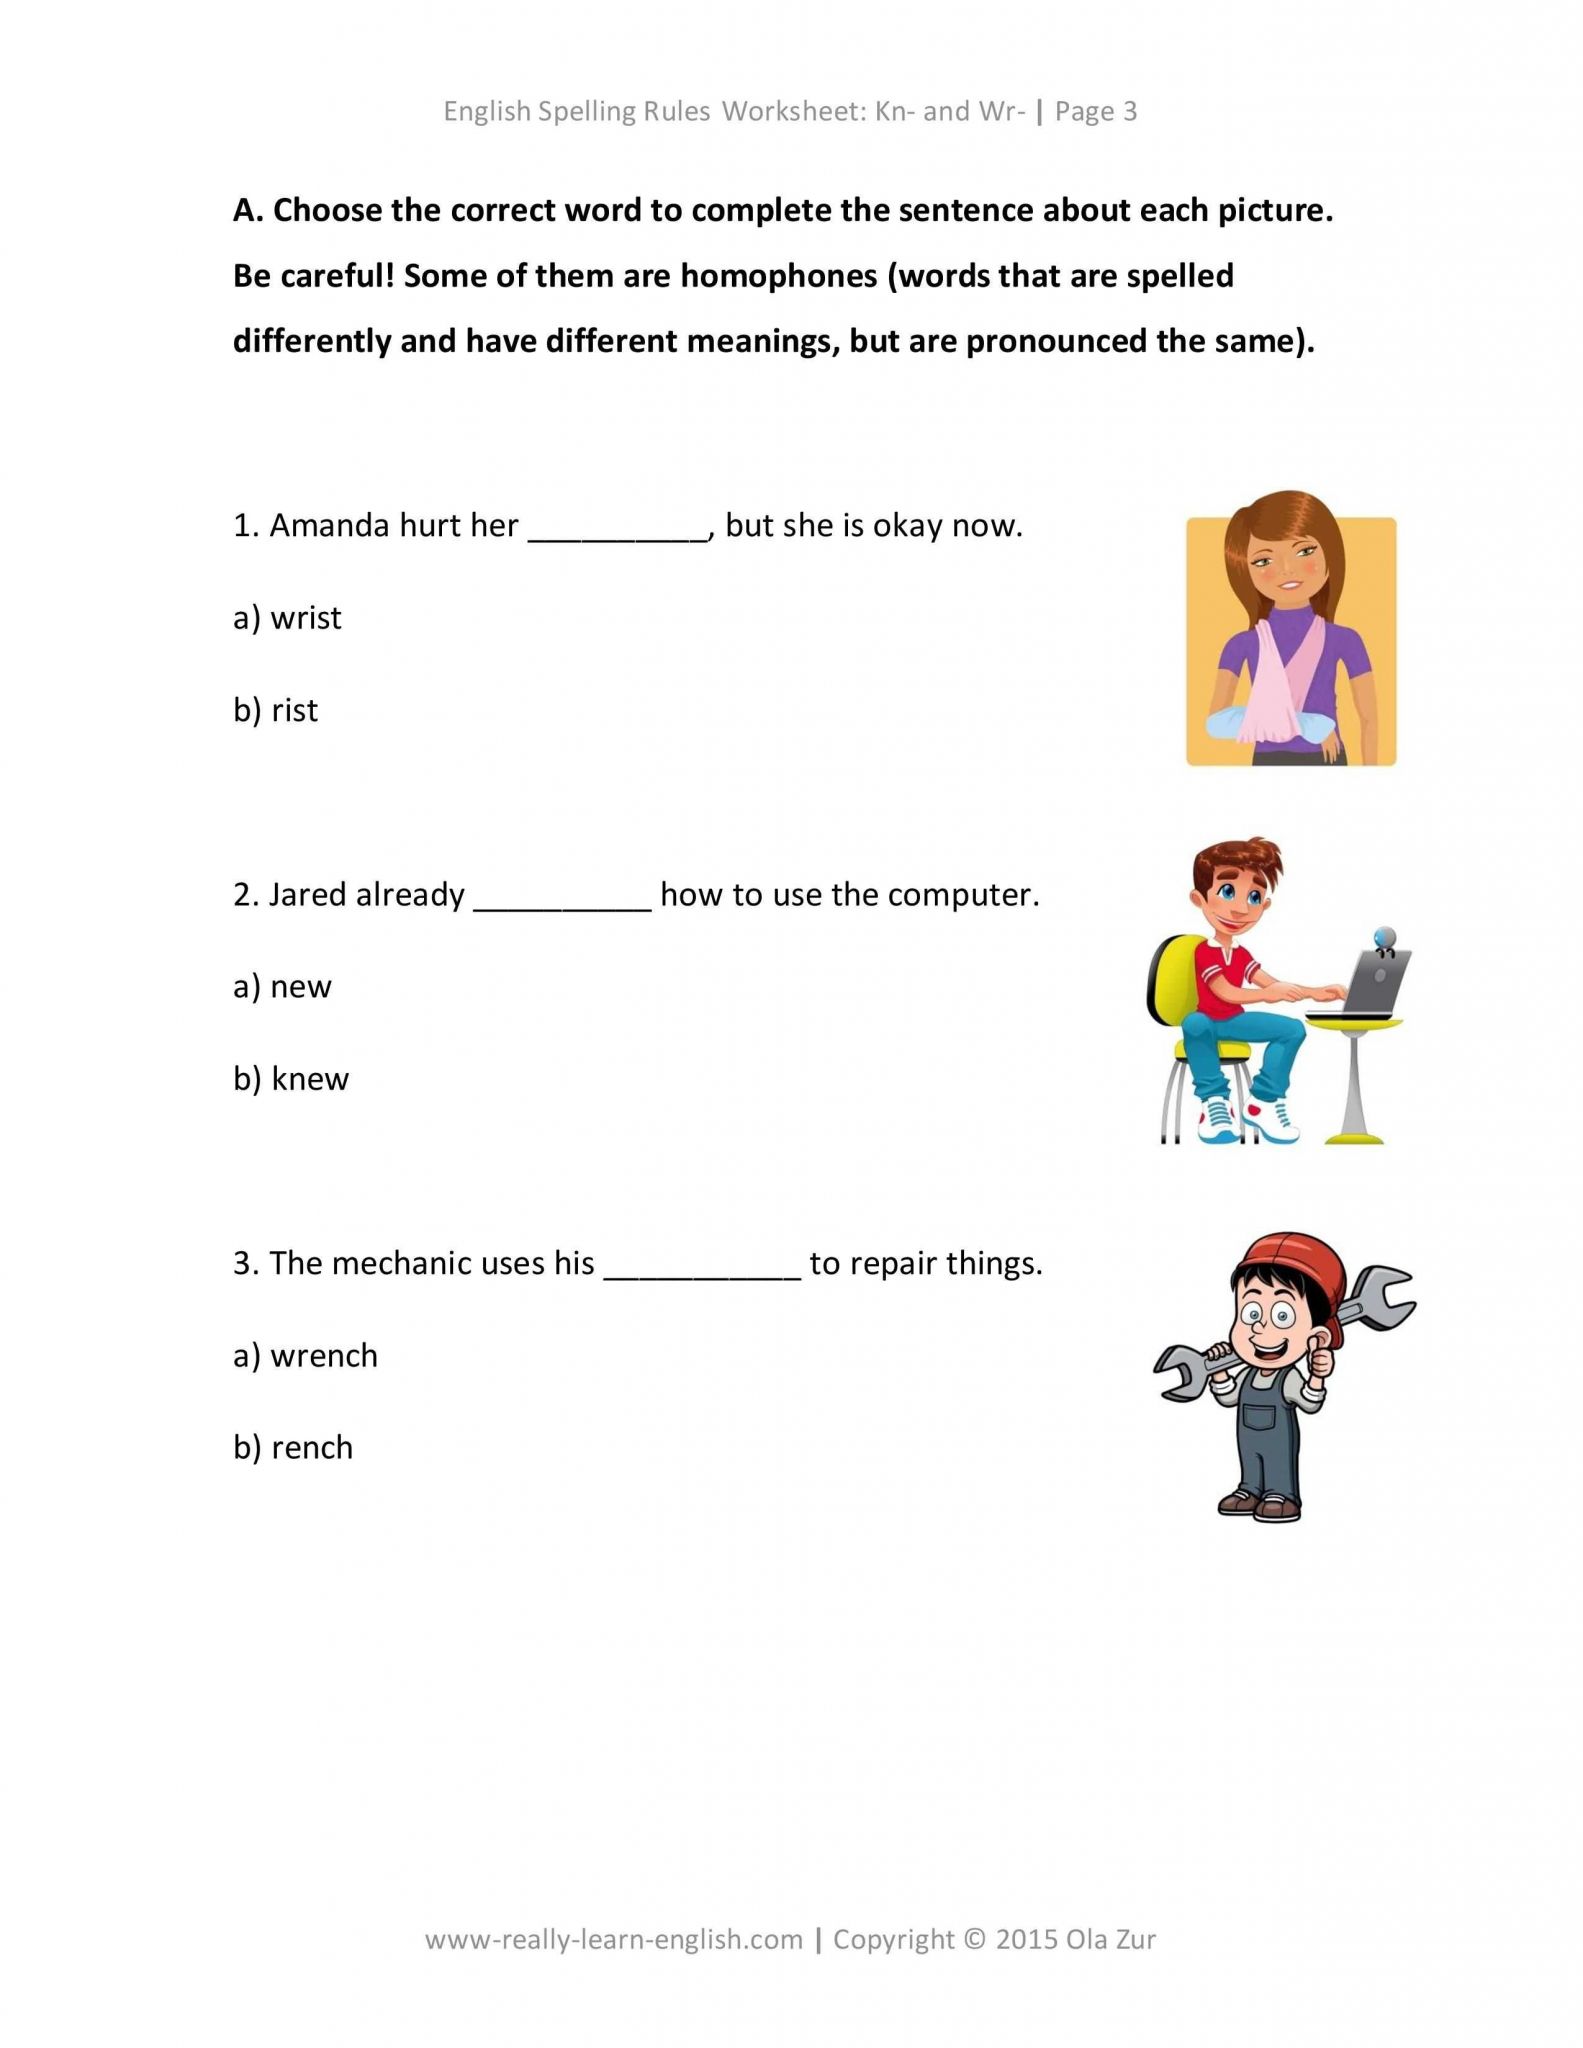 Brain Stretcher Worksheets Answers or the Plete List Of English Spelling Rules Lesson 3 Kn and Wr